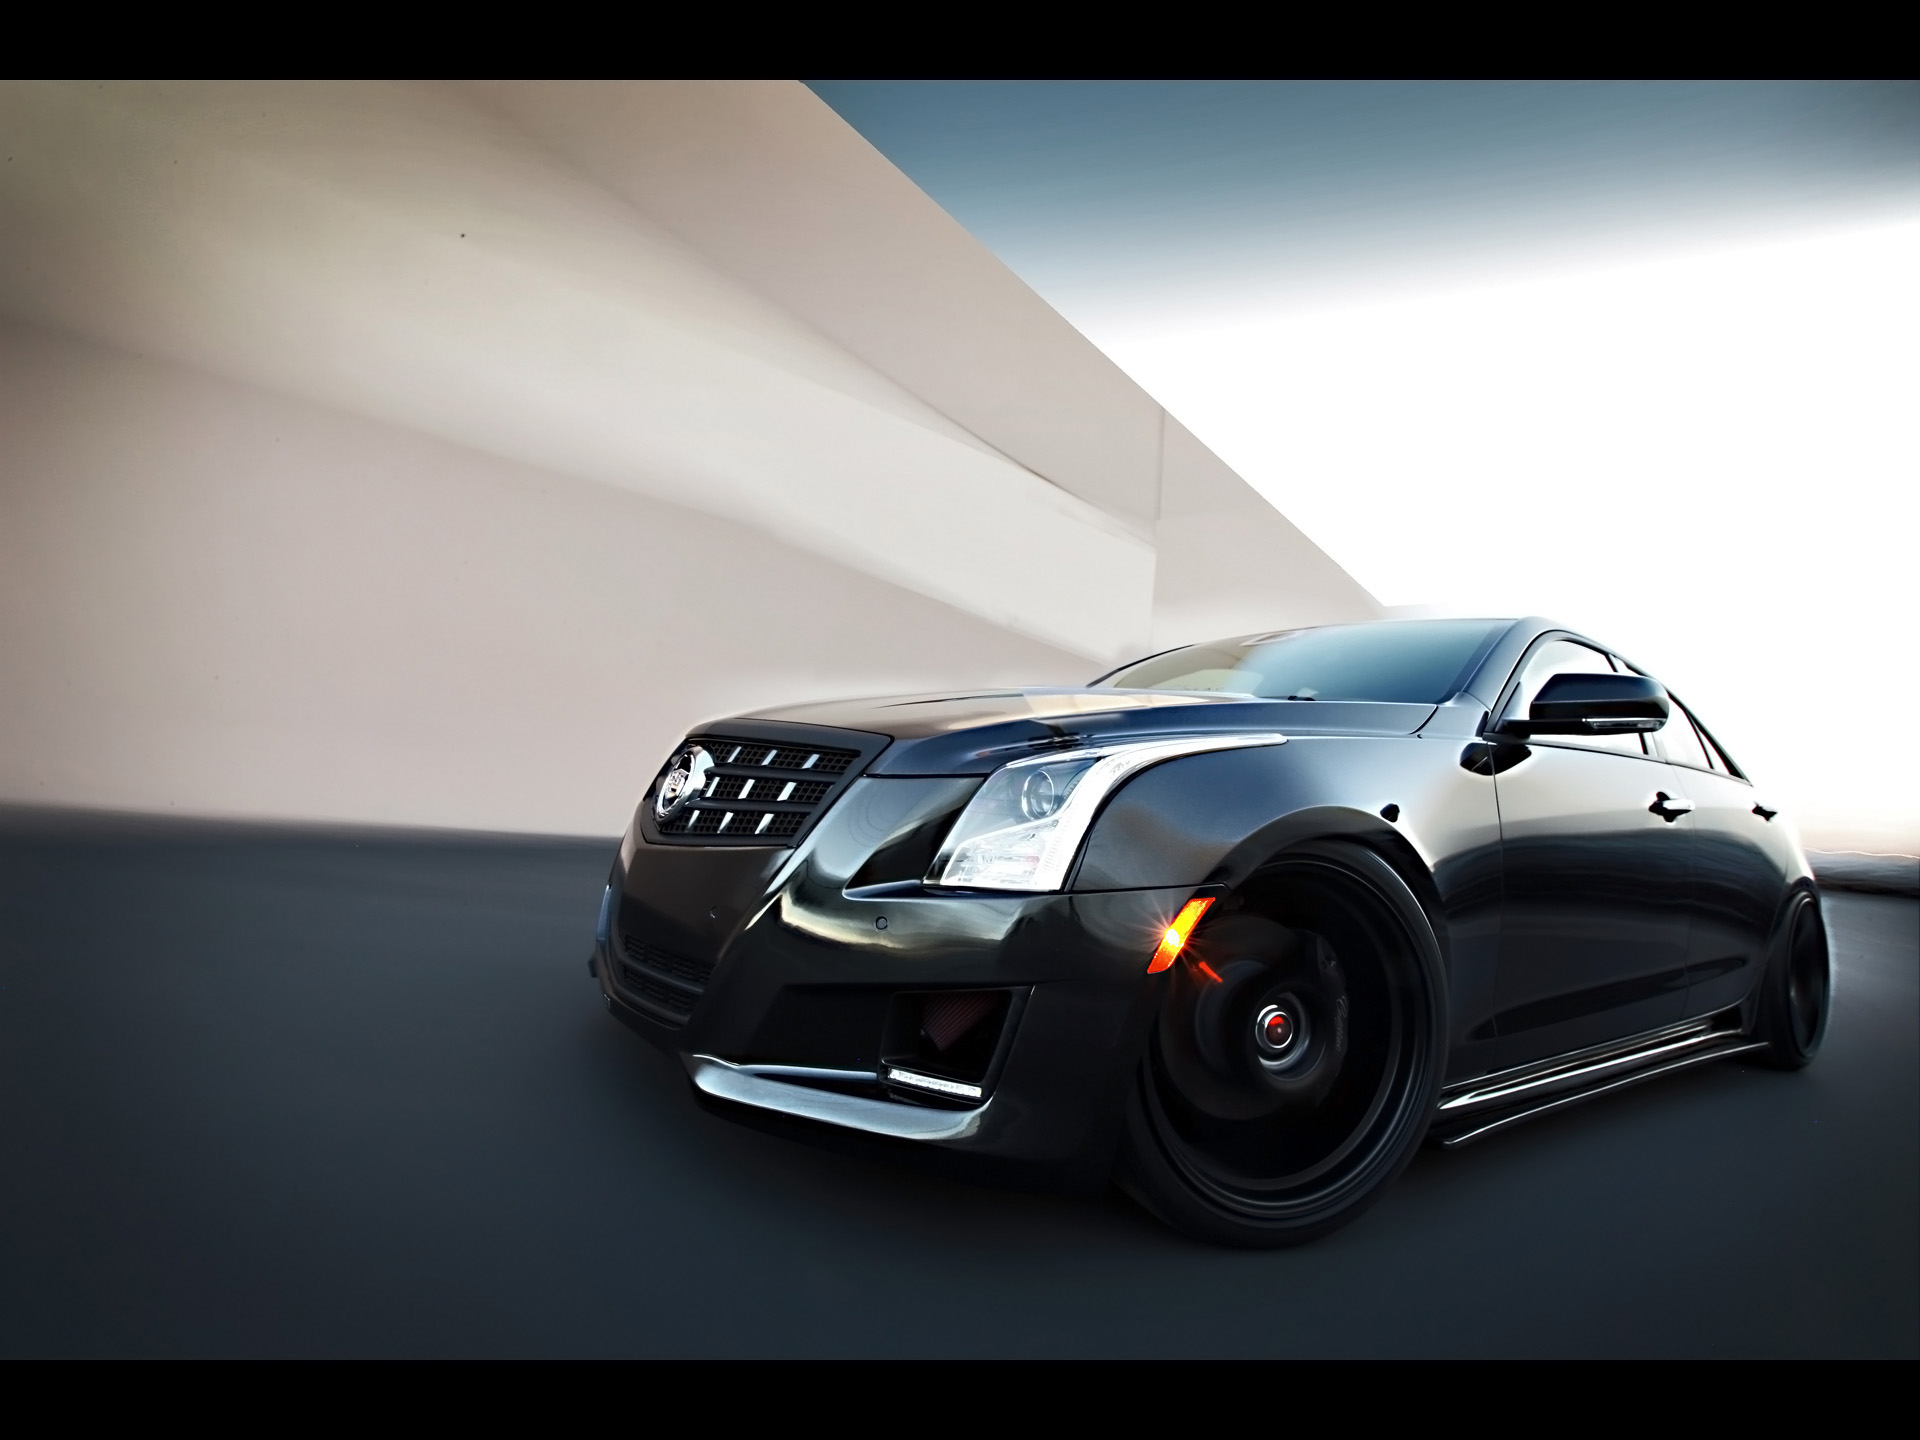 Magnificent Laptop Cadillac Wallpapers And Pictures, - Cadillac Ats , HD Wallpaper & Backgrounds